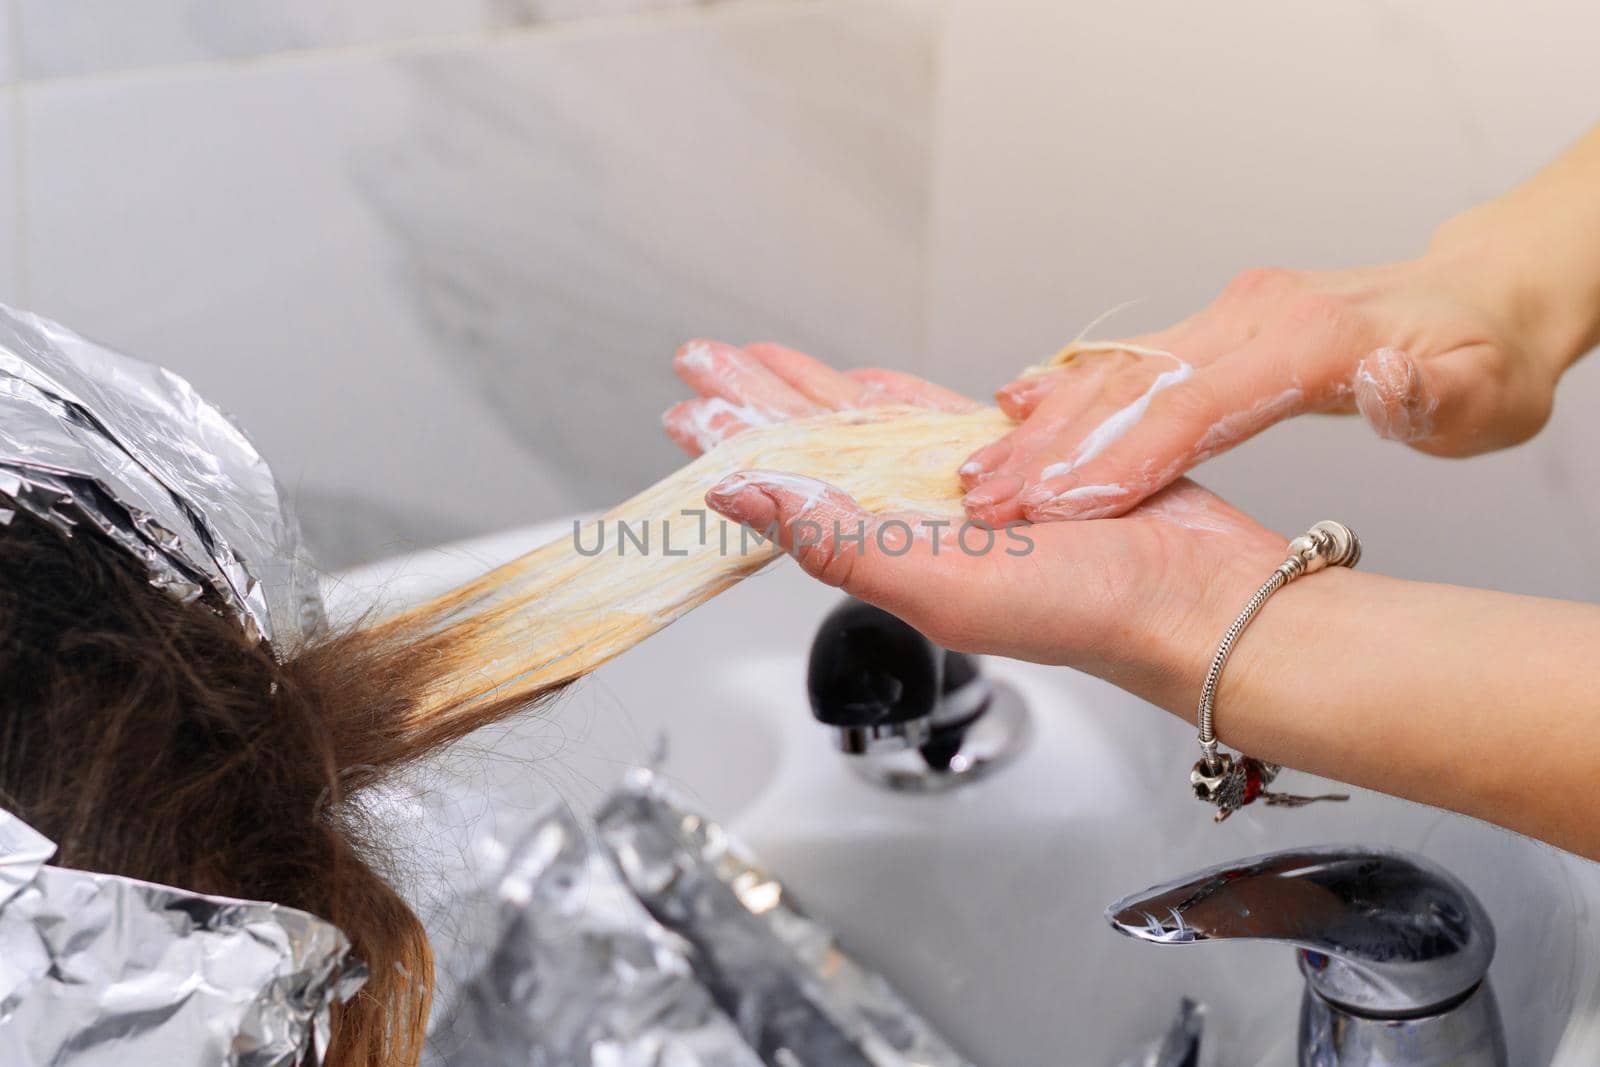 Washing hair dye from a hairdresser, removing foil from hair. new